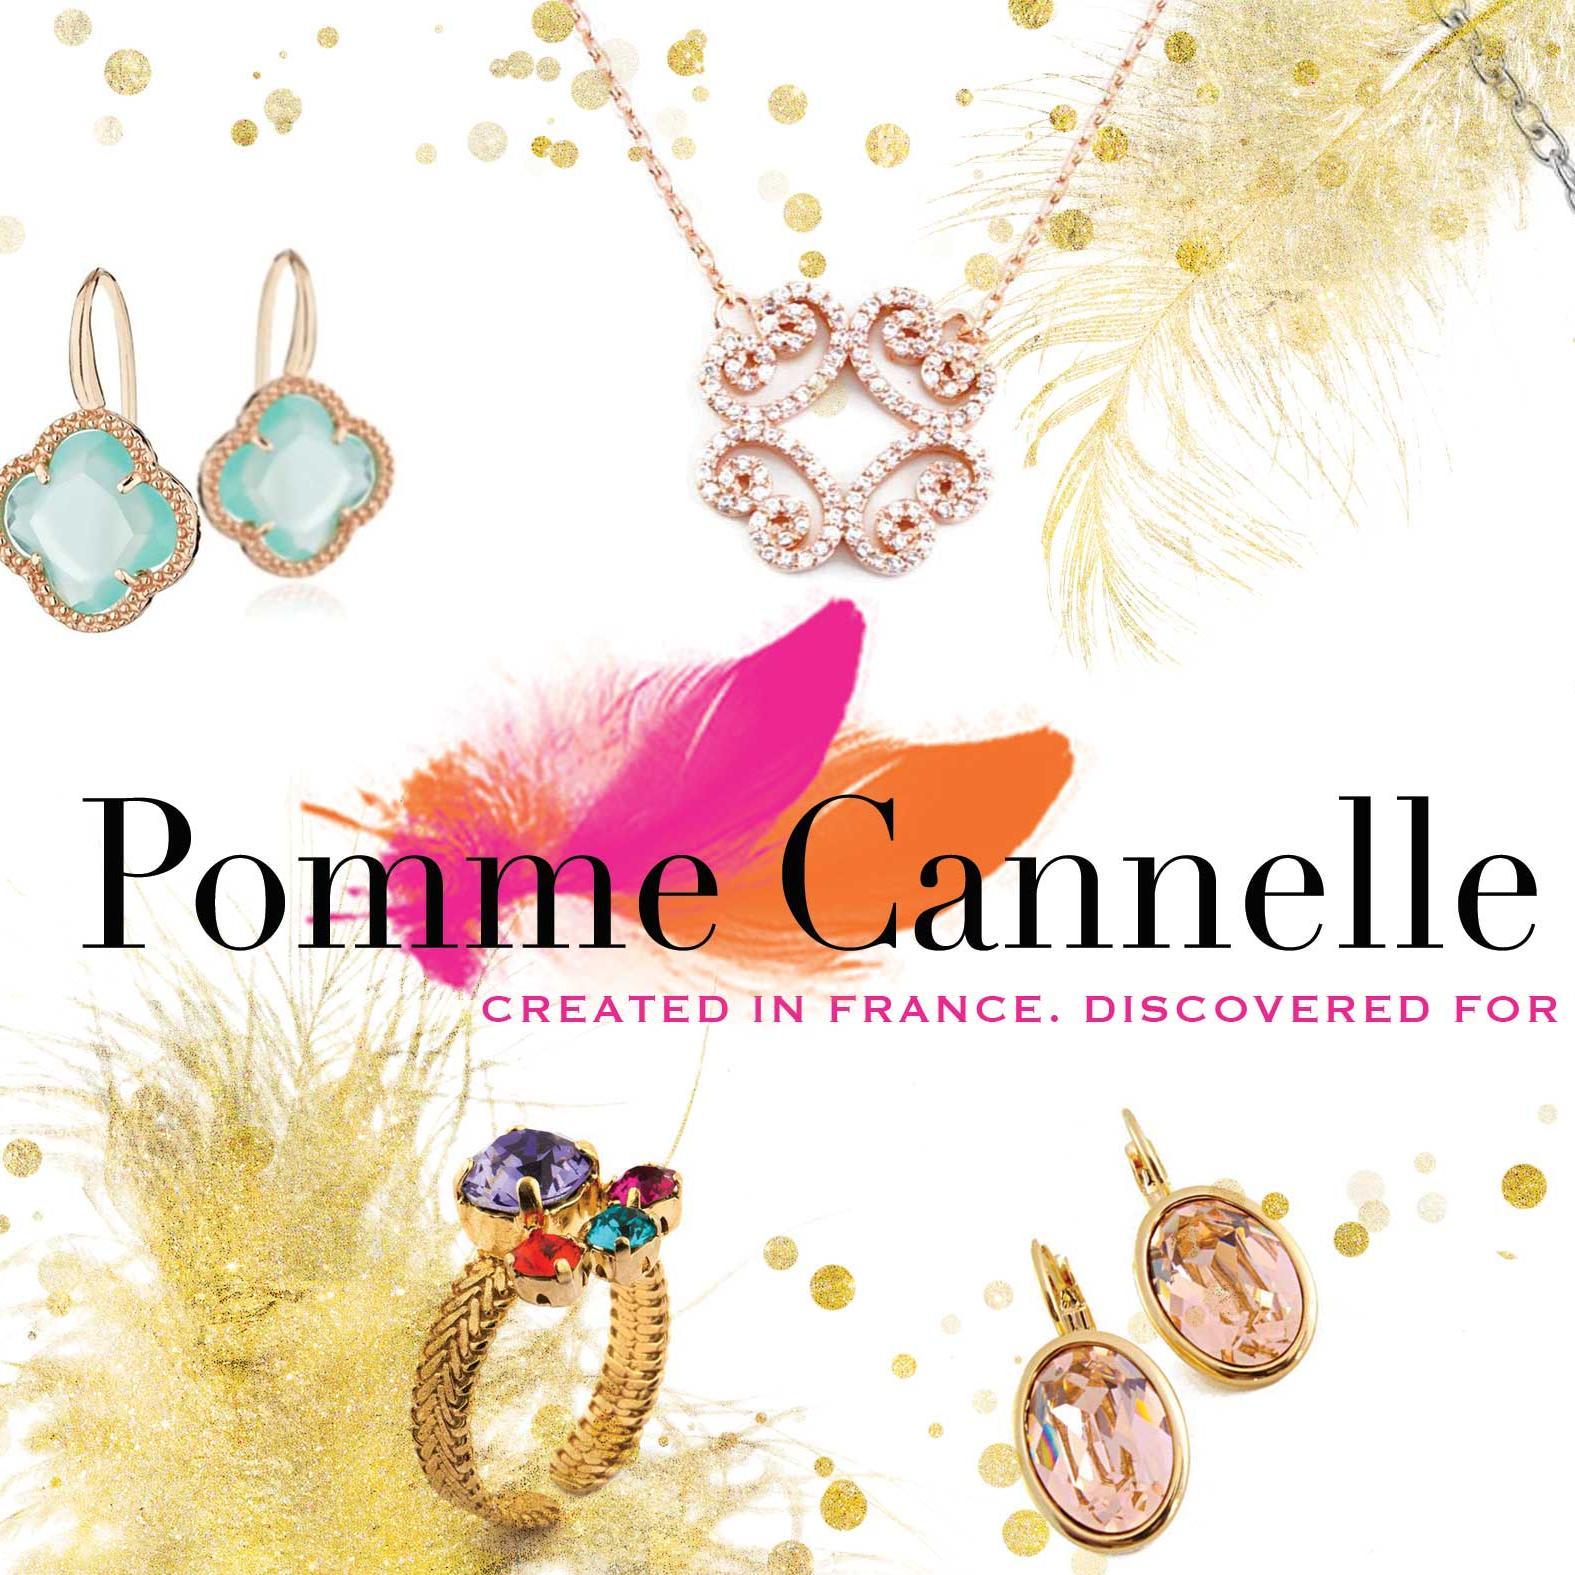 Discover France’s latest trends with jewelry and accessories from our Parisian boutiques. #jewelry #jewelryfromFrance #Frenchdesigner #fashionjewelry #Paris